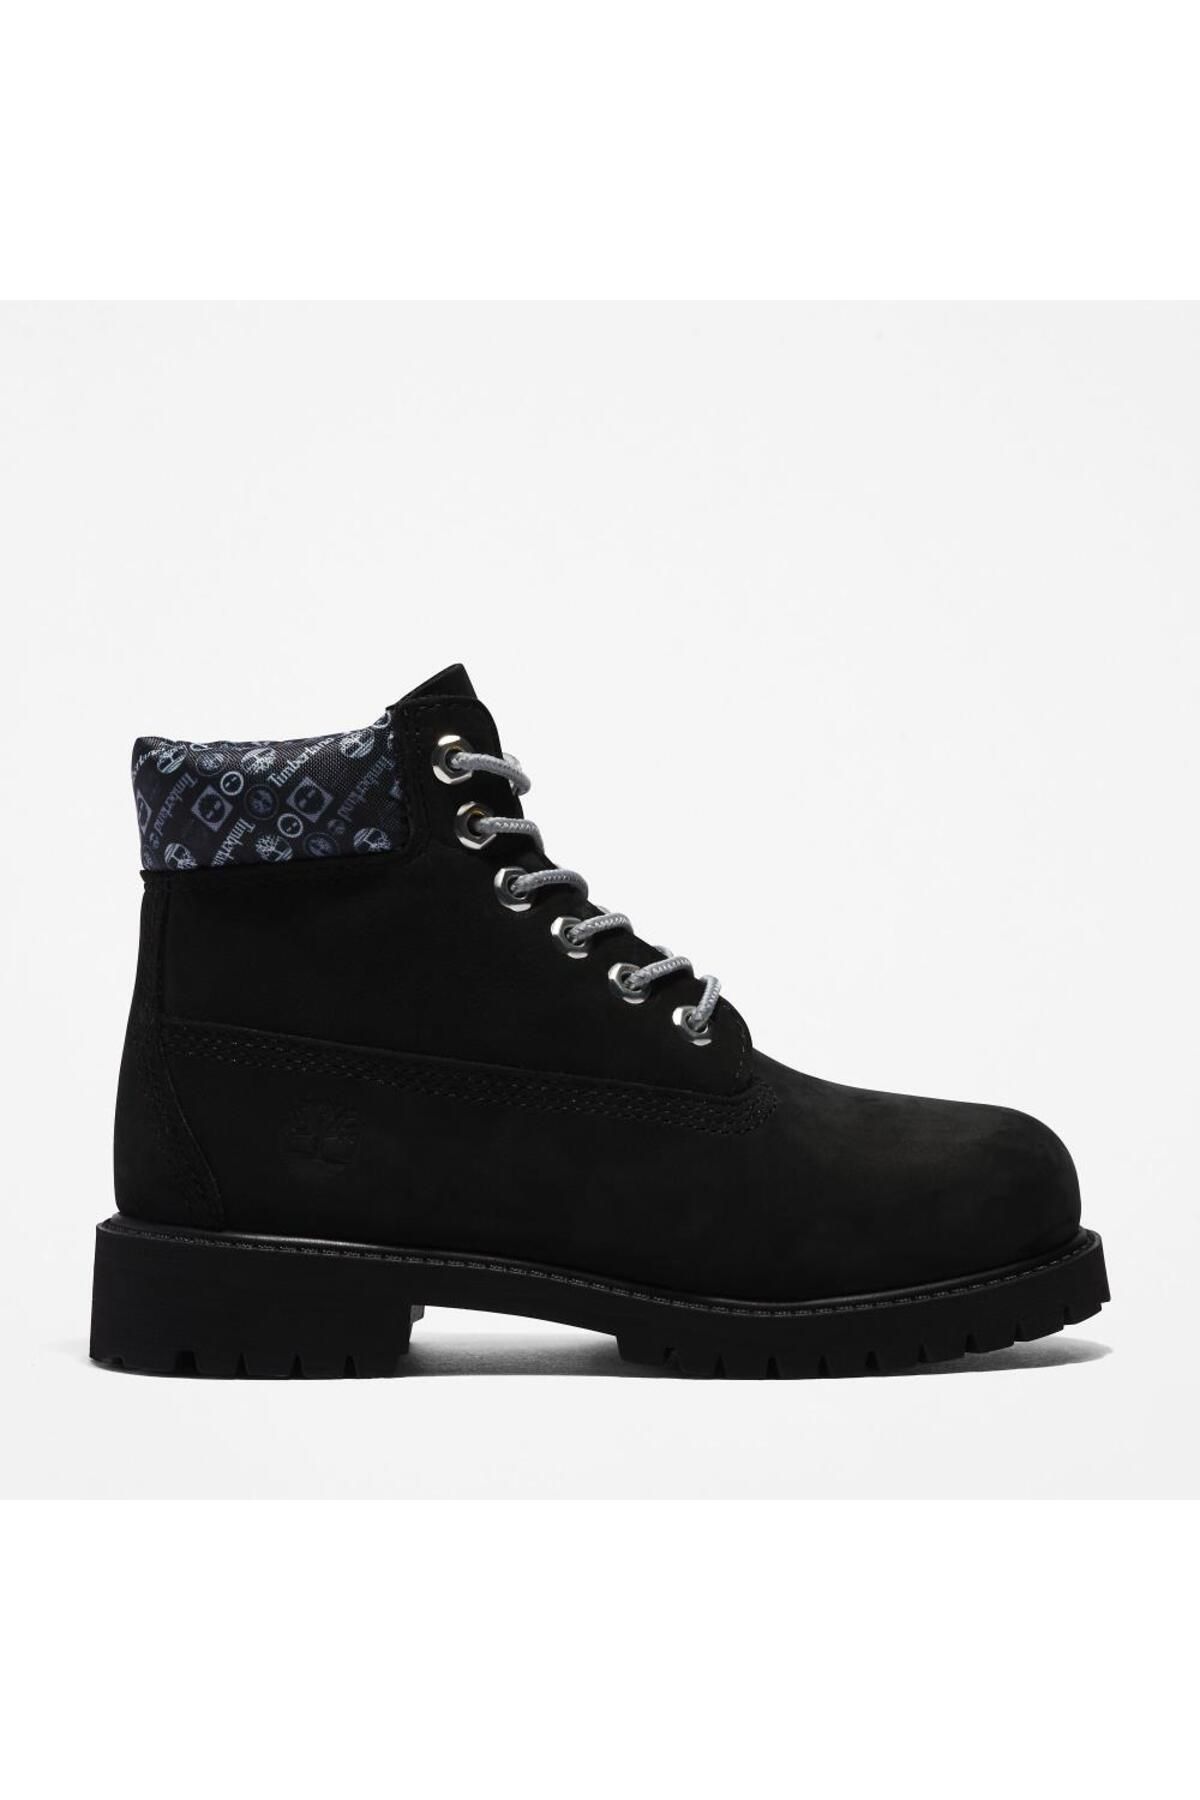 Timberland 6 In Premium WP Boot TB0A26N60011